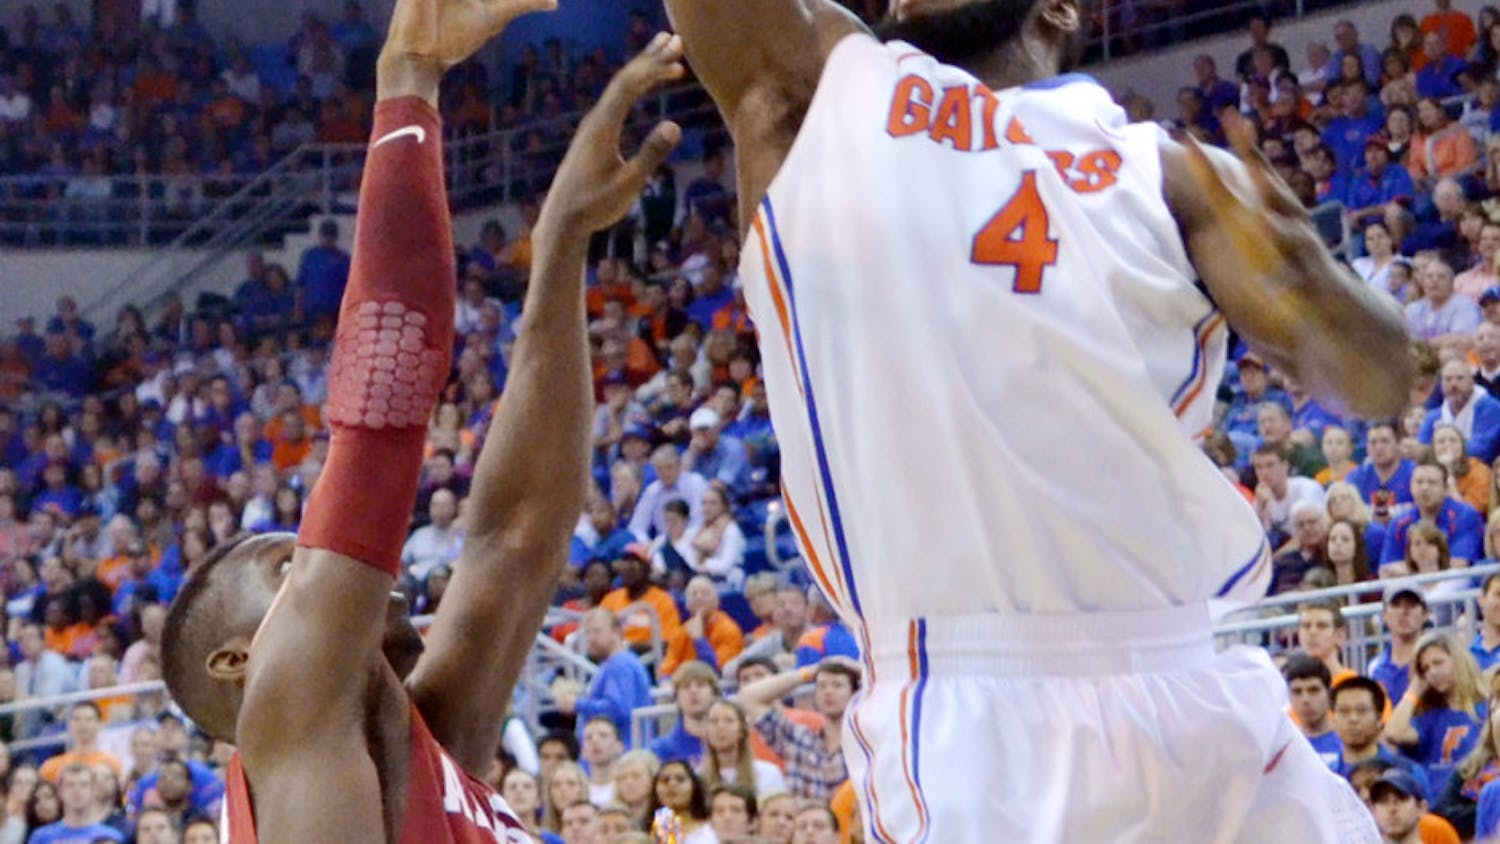 Patric Young attempts a layup during Florida’s 78-69 win against Alabama on Feb. 8 in the O’Connell Center.